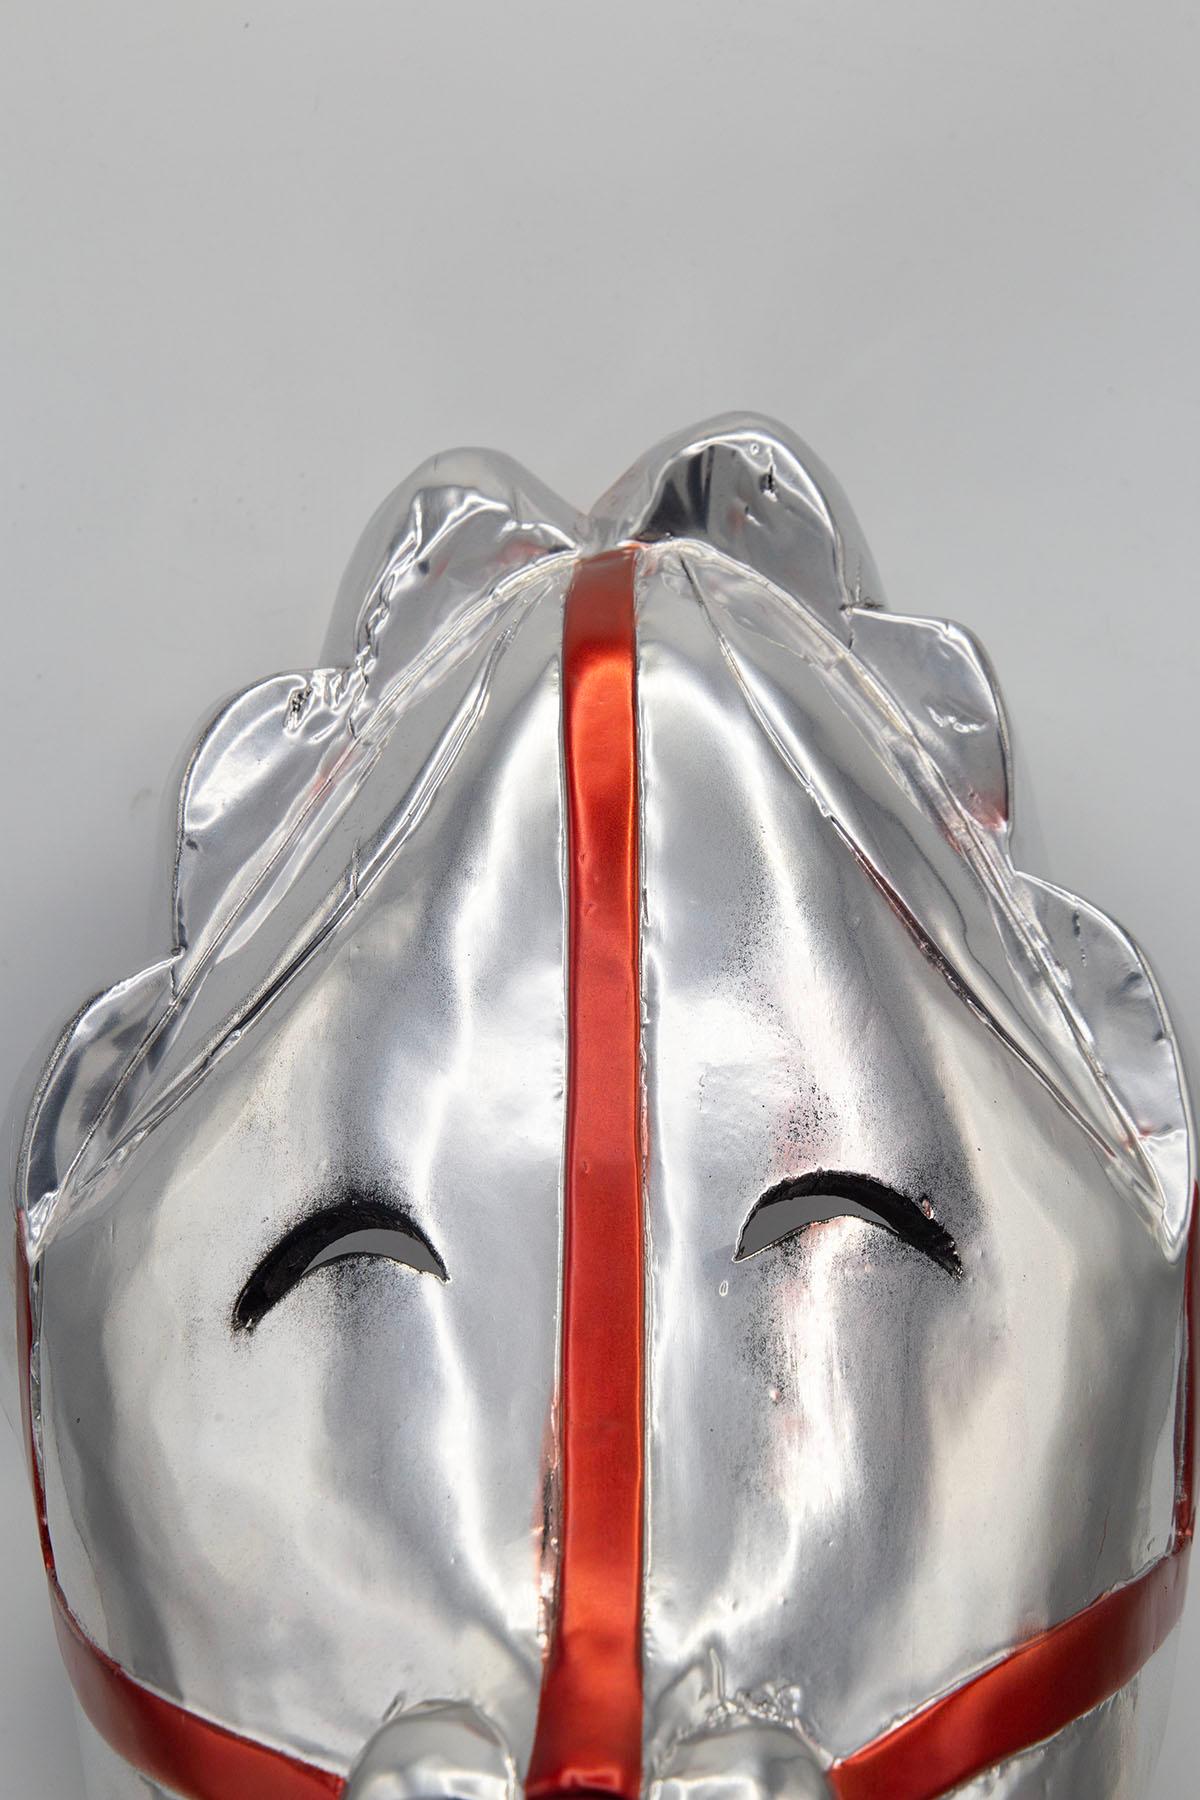 Italian African Futurist Silver Mask Created by Bomber Bax For Sale